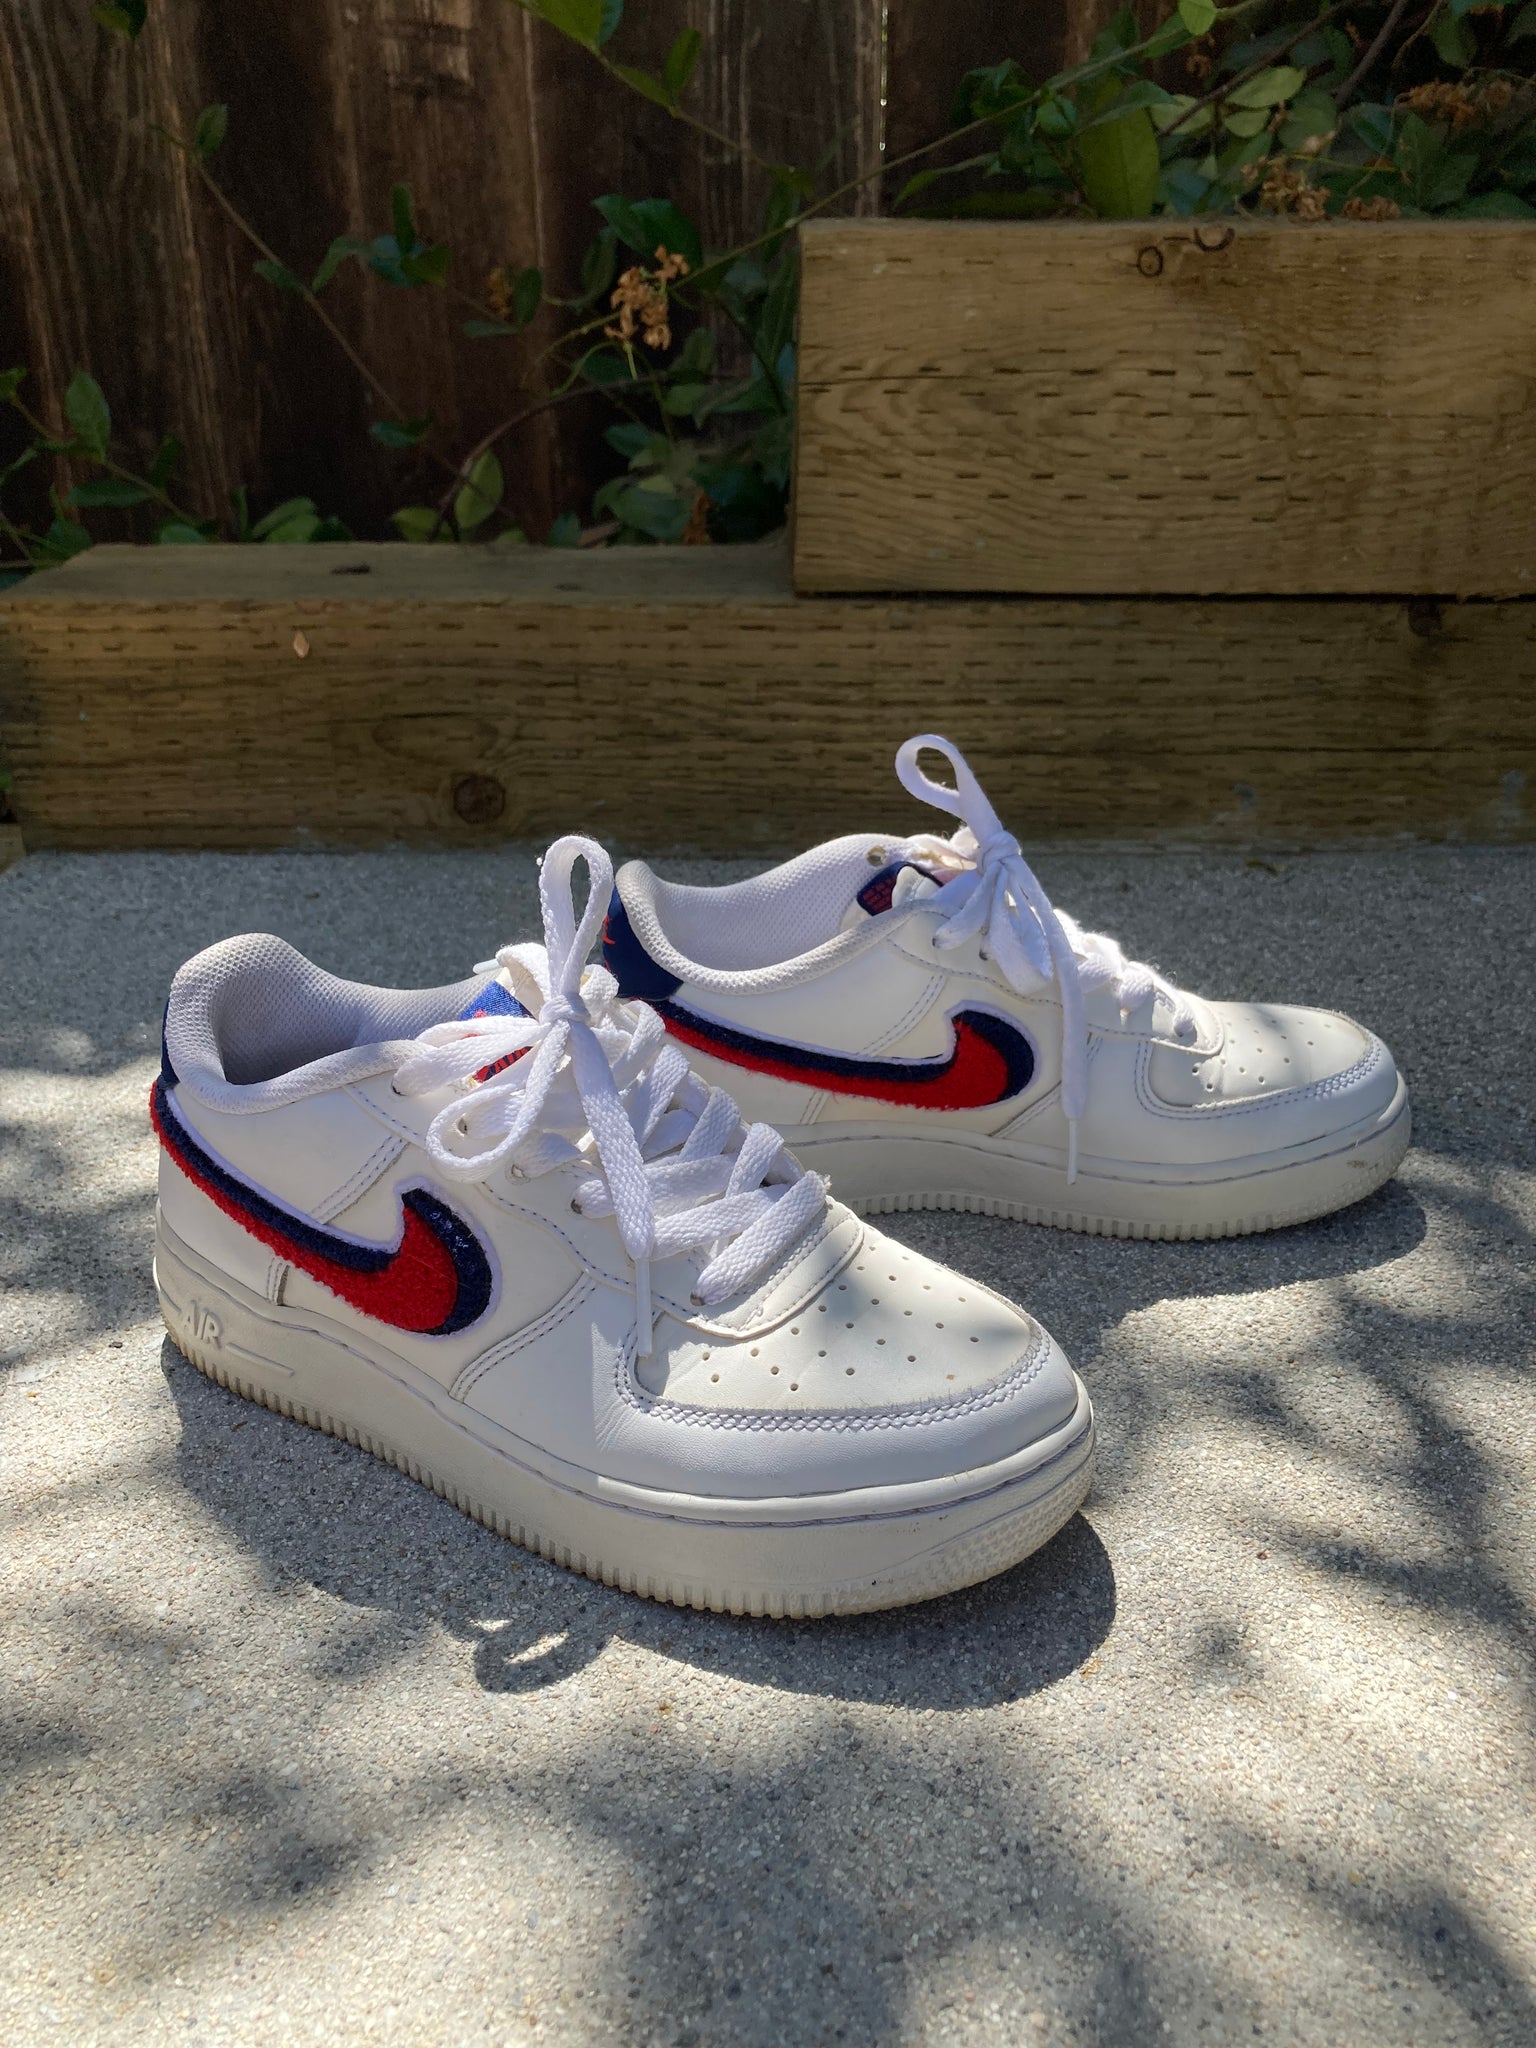 bewaker Begroeten Eervol White Nike Air Force 1 with Red and Blue "Chenille Swoosh" size 6.5 Wo –  The Curatorial Dept.